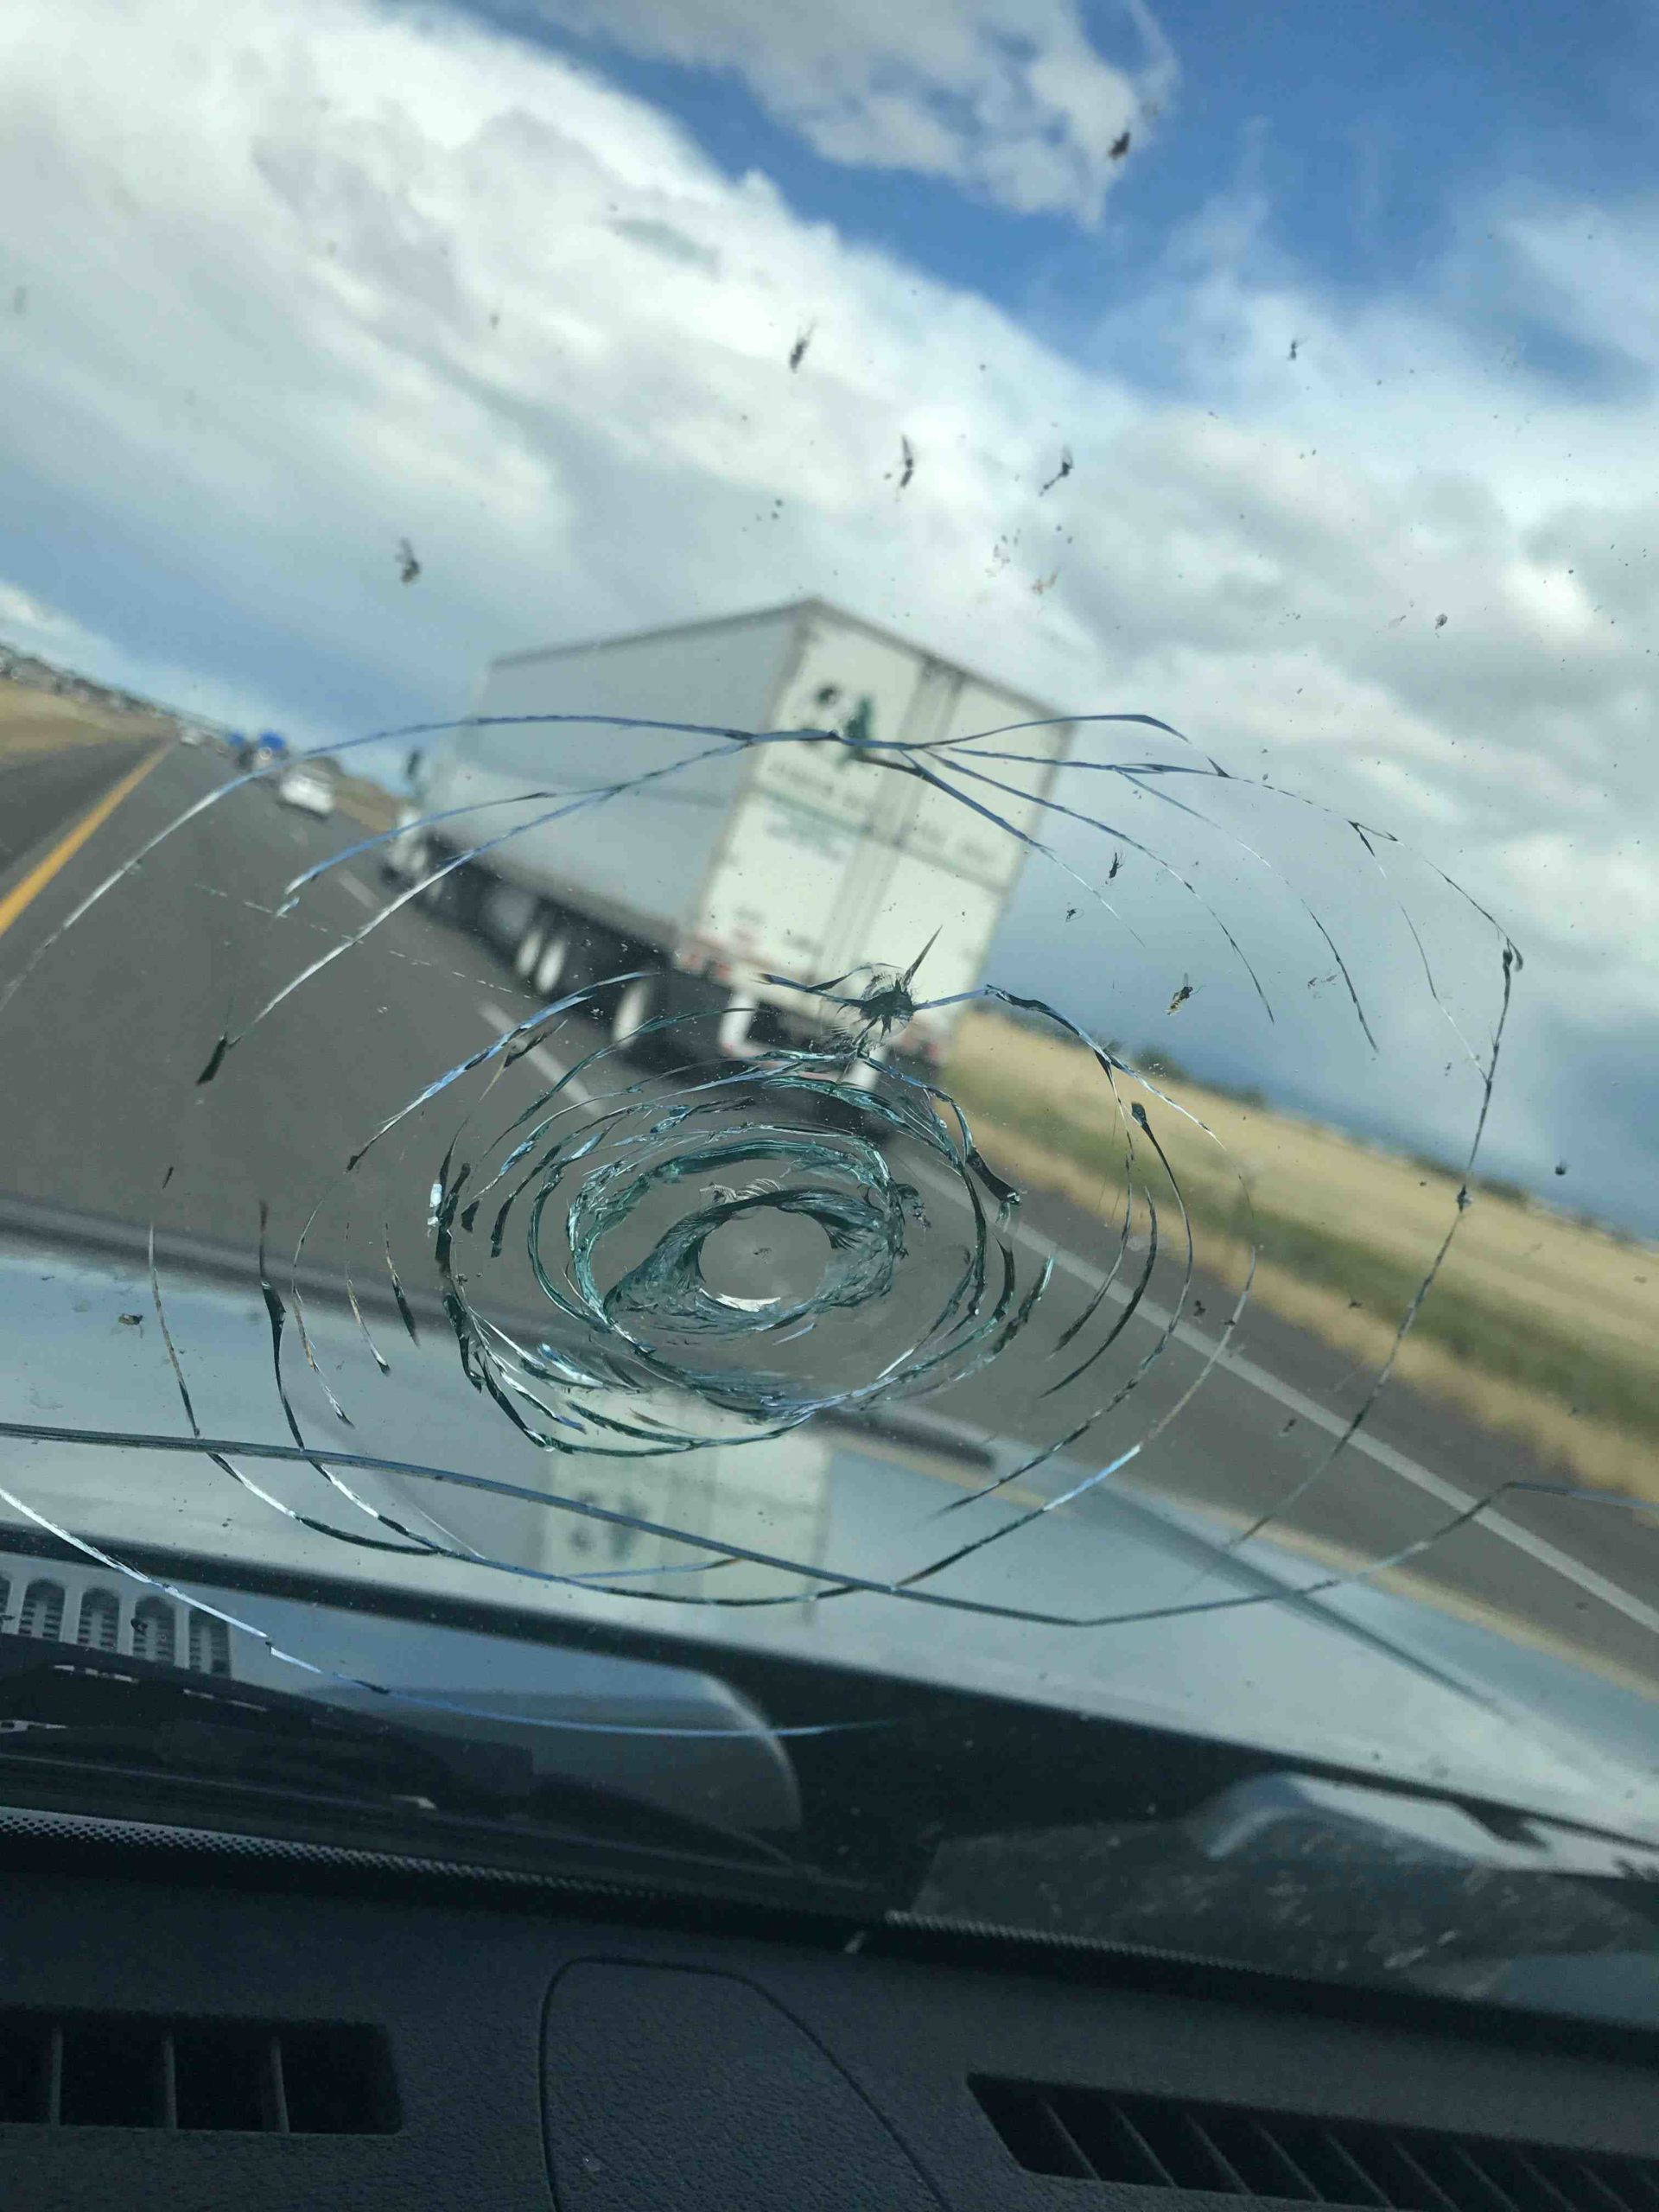 Are 18 wheelers responsible for broken windshields?